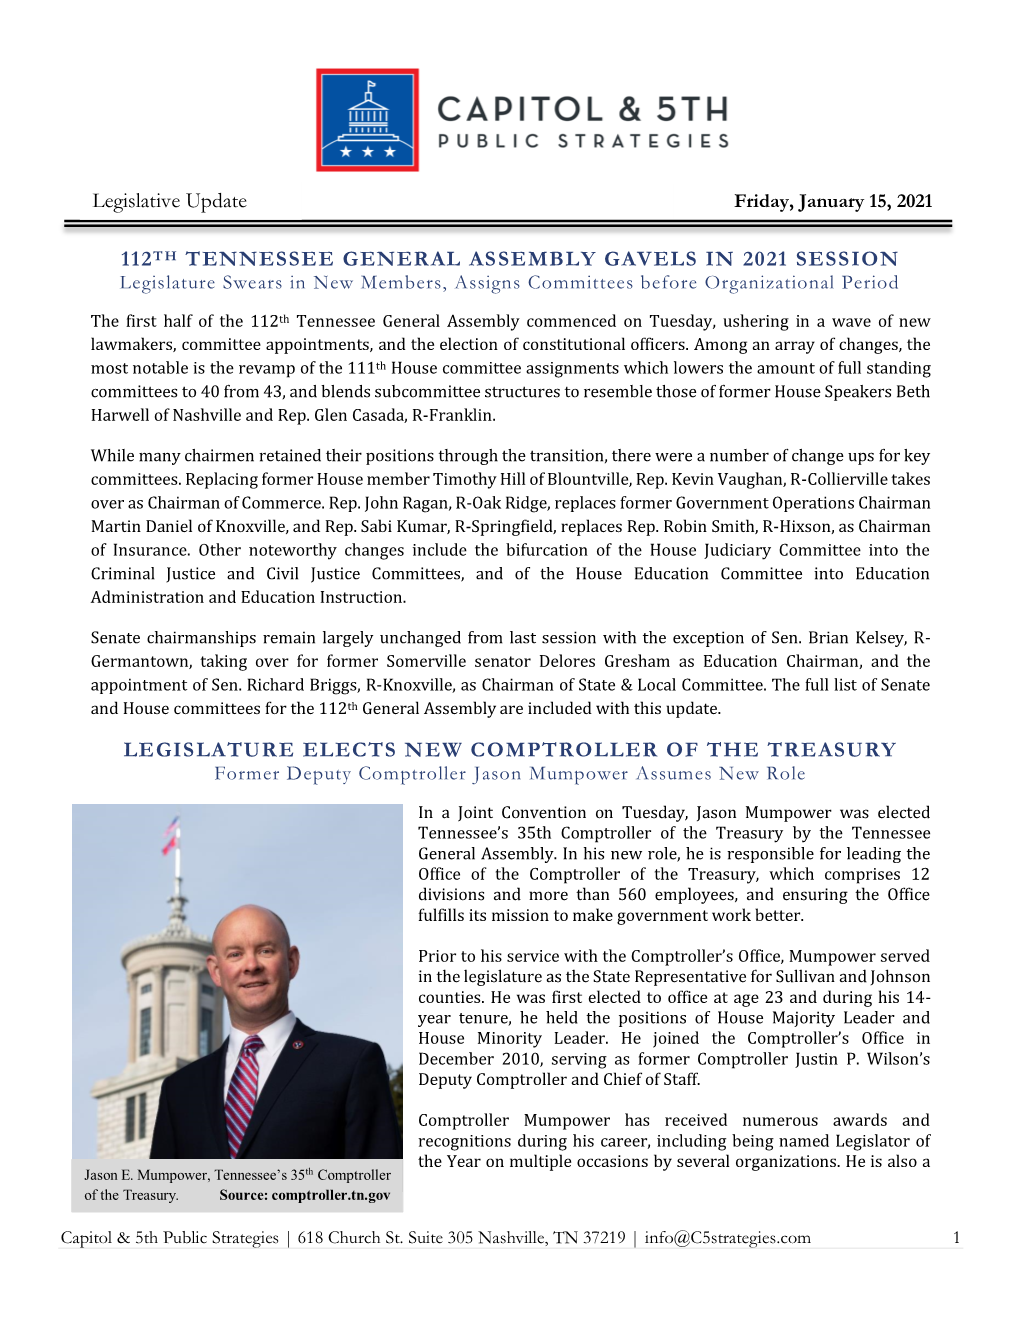 112TH TENNESSEE GENERAL ASSEMBLY GAVELS in 2021 SESSION LEGISLATURE ELECTS NEW COMPTROLLER of the TREASURY Legislative Update